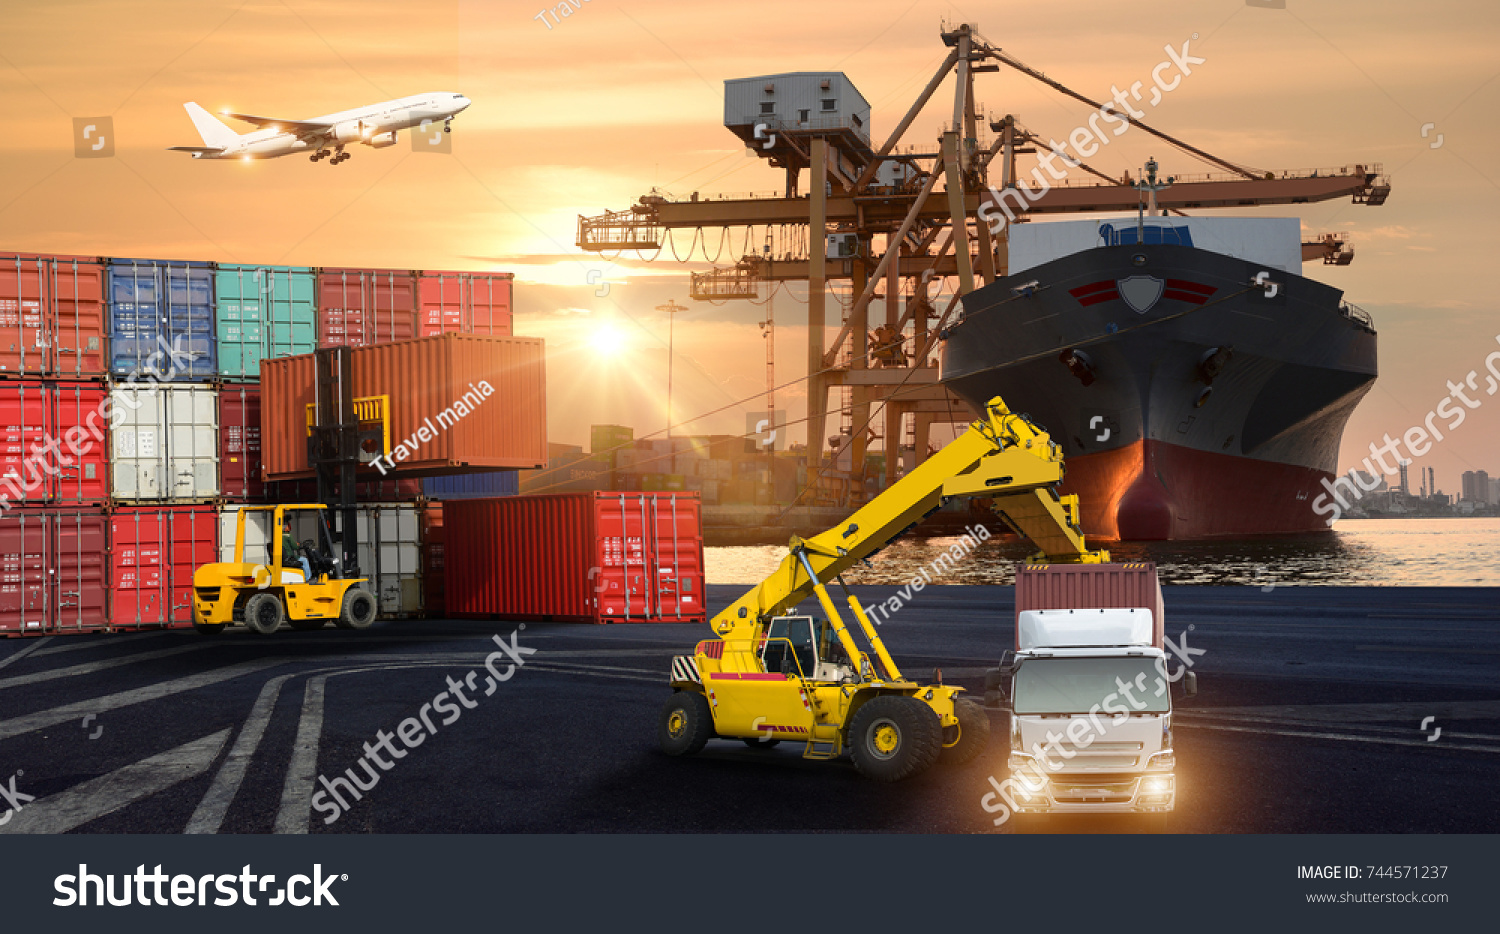 Logistics and transportation of Container Cargo ship and Cargo plane with working crane bridge in shipyard at sunrise, logistic import export and transport industry background #744571237